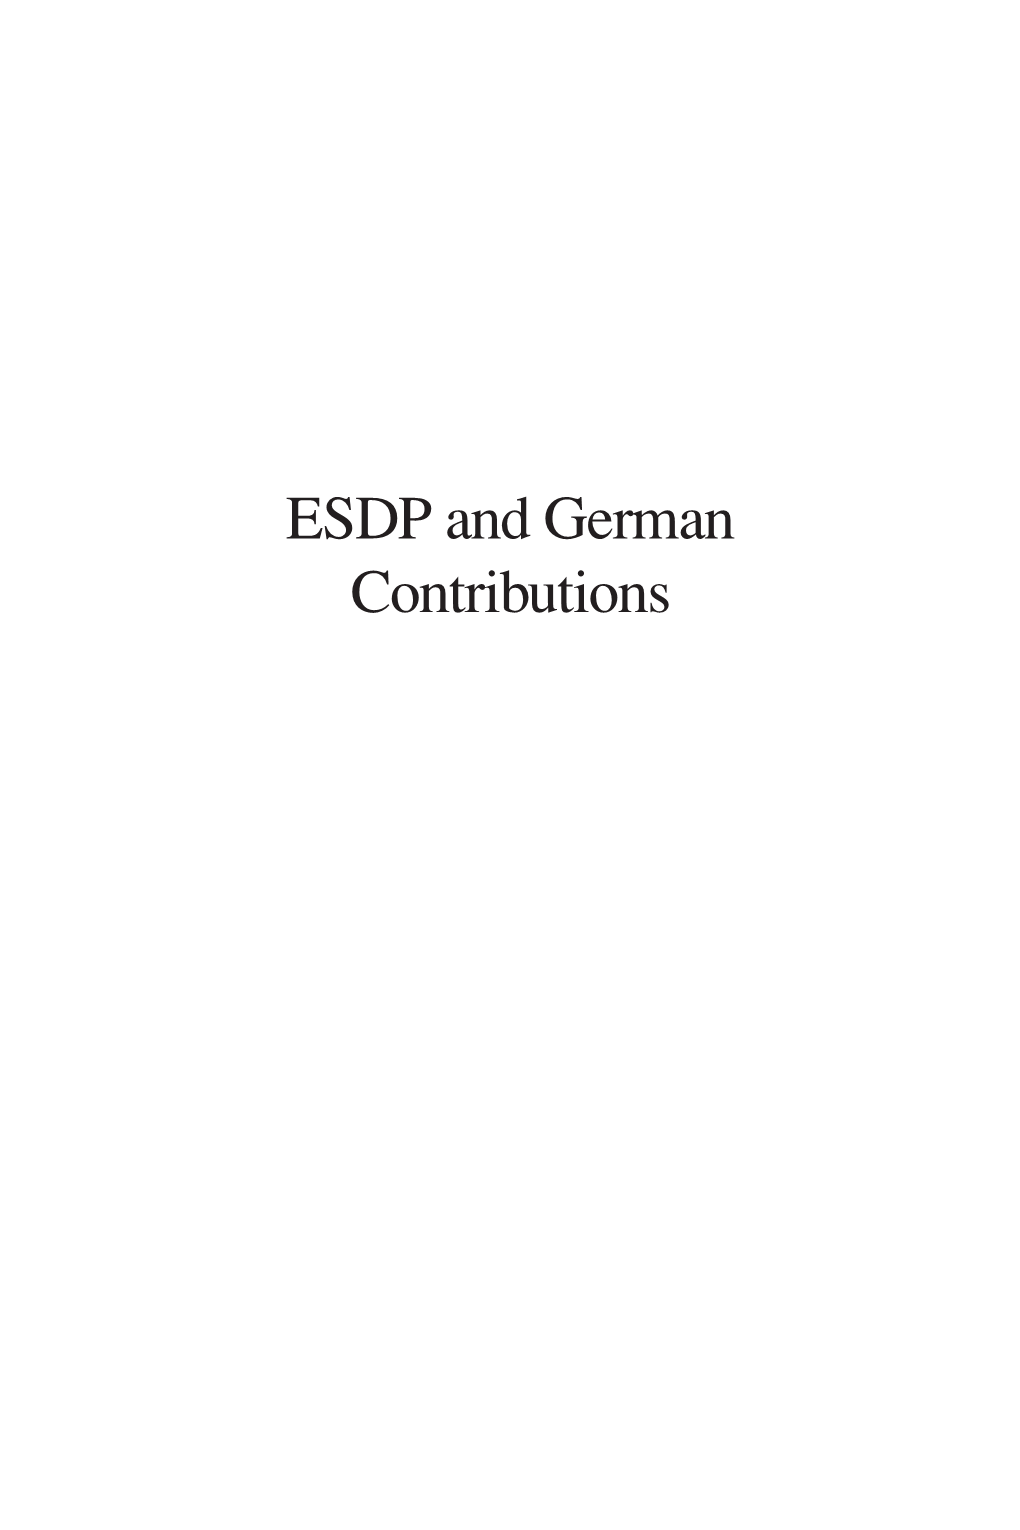 ESDP and German Contributions